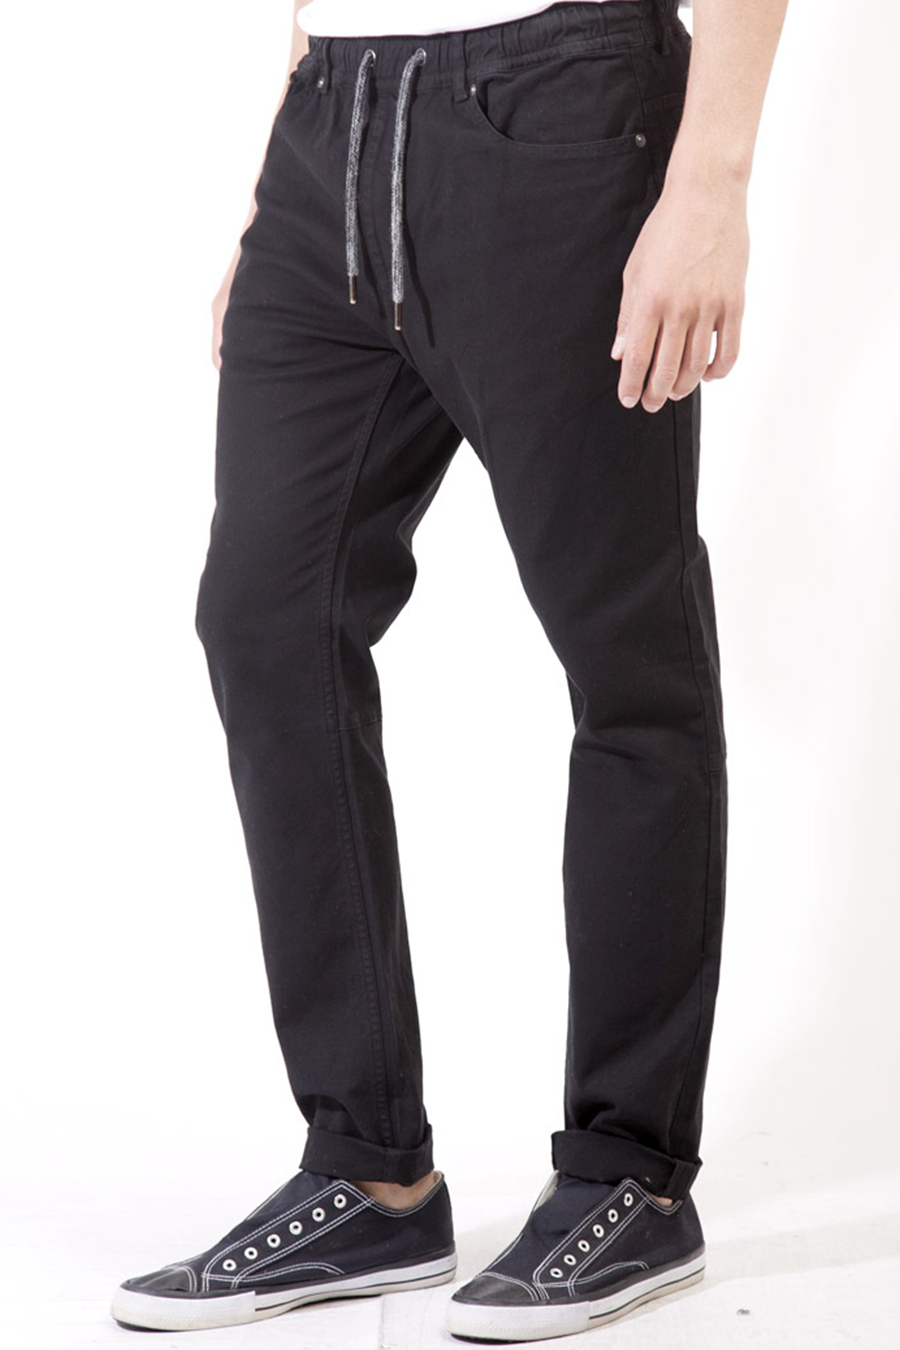 Edwin Slouch Pant | Black - Main Image Number 2 of 3